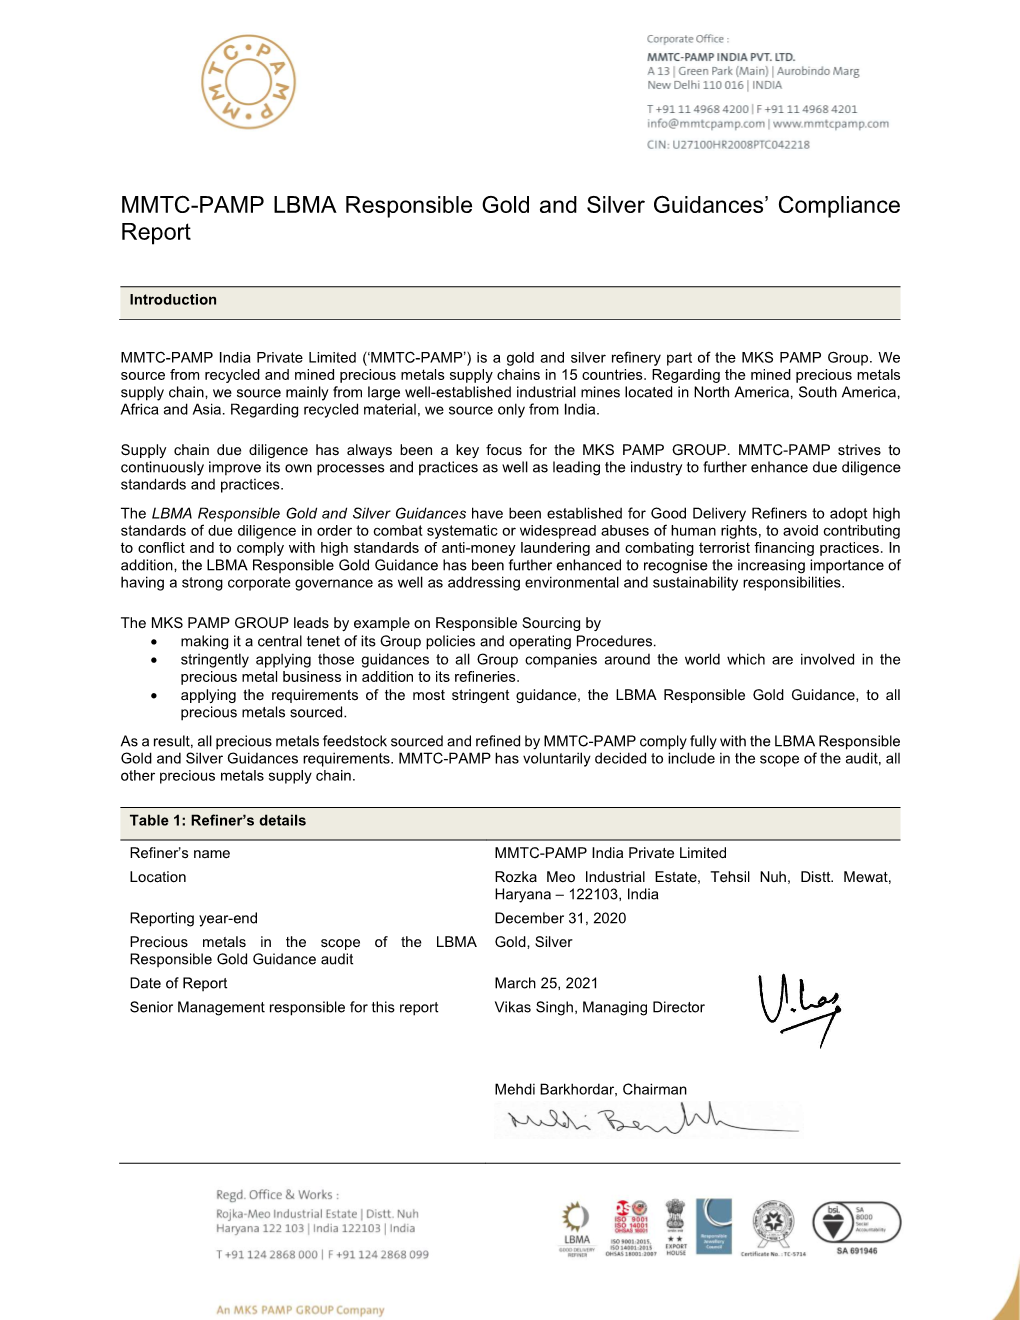 MMTC-PAMP LBMA Responsible Gold and Silver Guidances’ Compliance Report